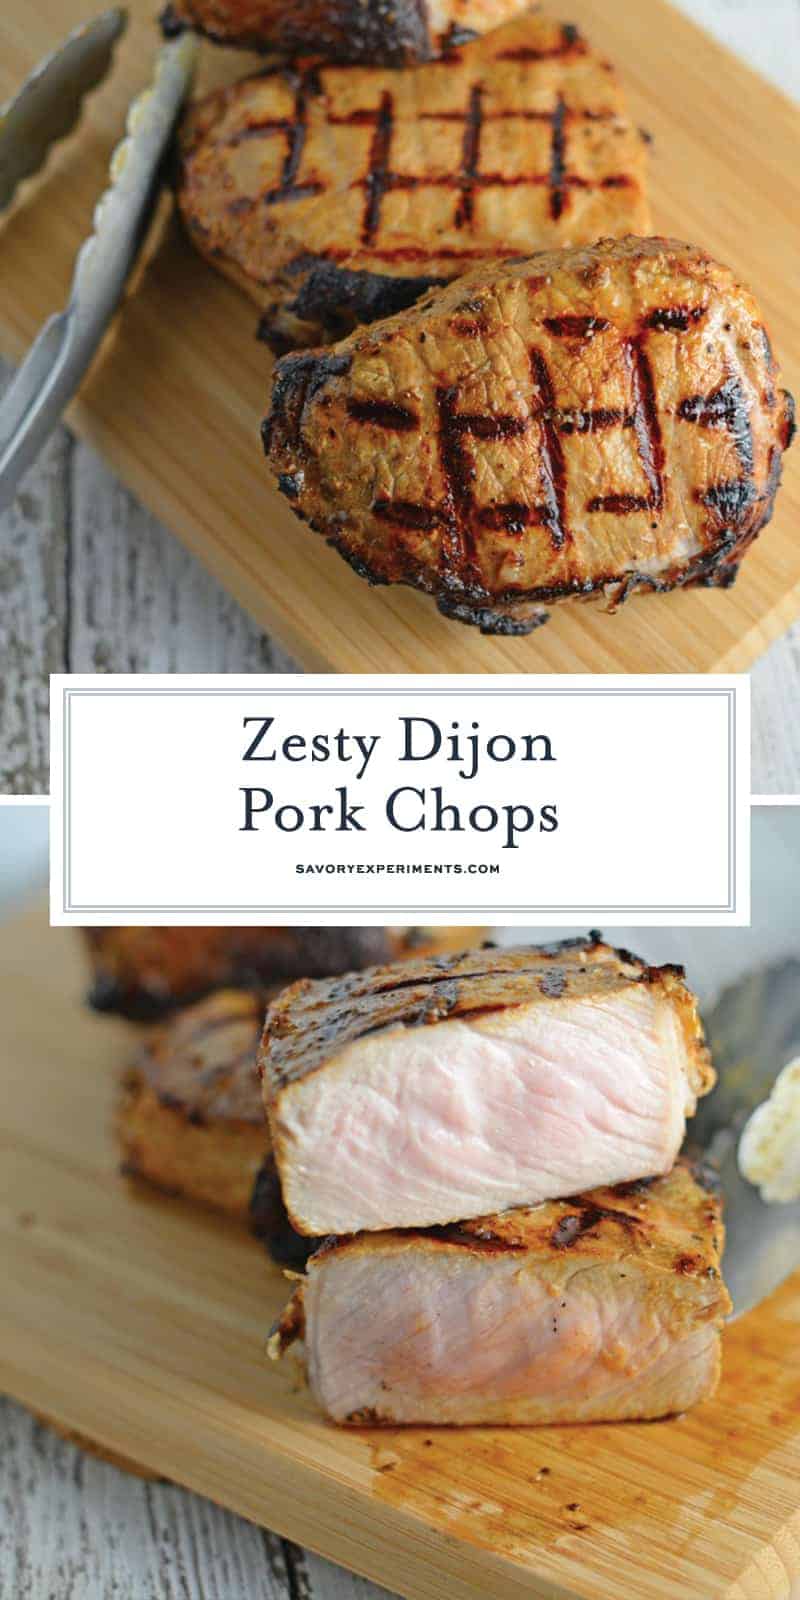 Grilled Dijon Pork Chops are a favorite for pork on the grill. A zesty and easy pork marinade recipes perfect for grilled or baked pork chops! #porkchopsonthegrill #grilledpork www.savoryexperiments.com